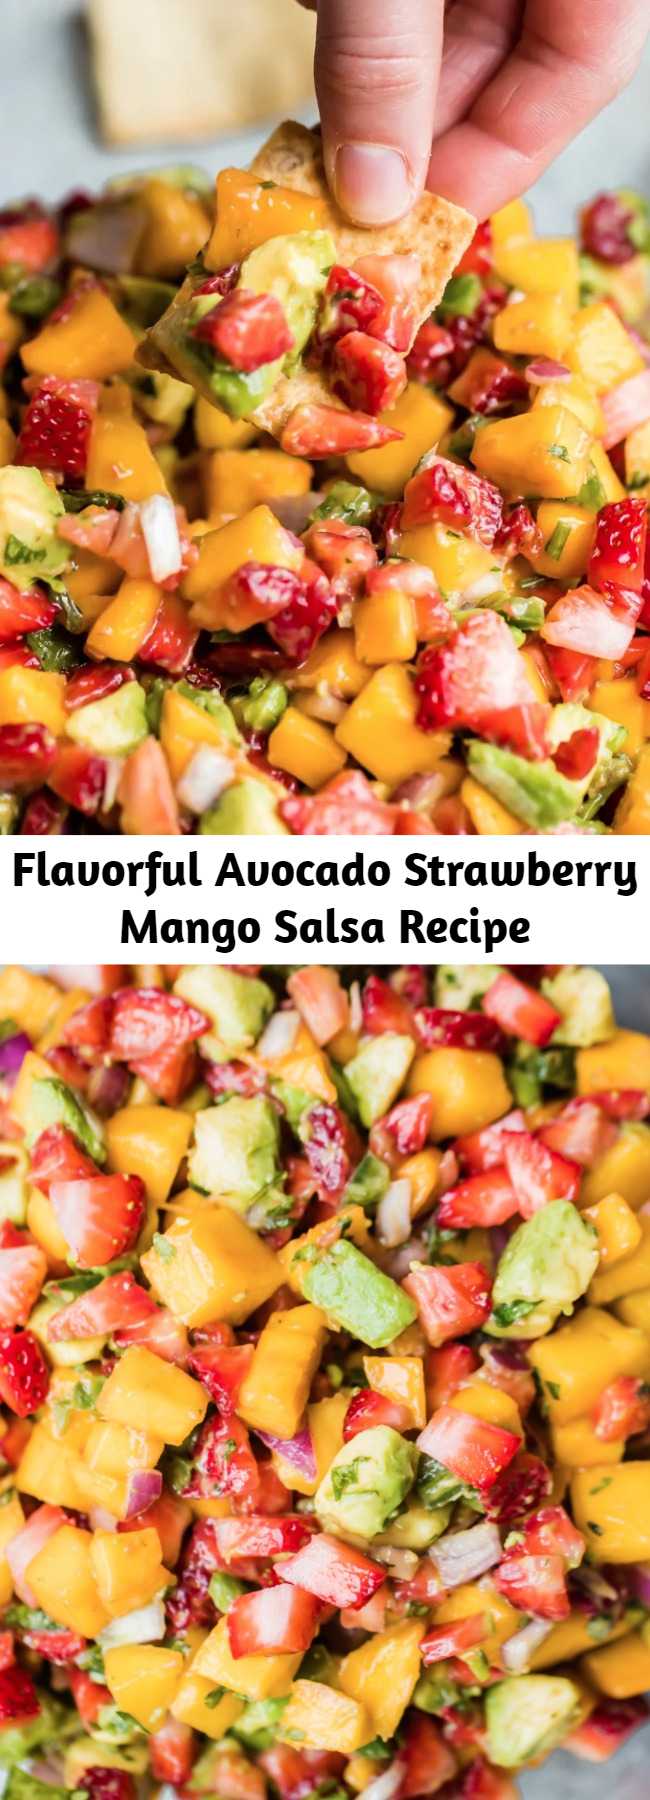 Flavorful Avocado Strawberry Mango Salsa Recipe - Bright and flavorful Avocado Strawberry Mango Salsa for dipping chips or adding to salads, tacos, fish, or chicken! This new take on salsa has hints of sweetness from fresh strawberries and mango, creaminess from avocado, and a kick of heat from jalapeño. It takes just 15 minutes to make and is perfect for parties! #salsa #partyfood #bbq #avocados #mango #summerfood #potluck